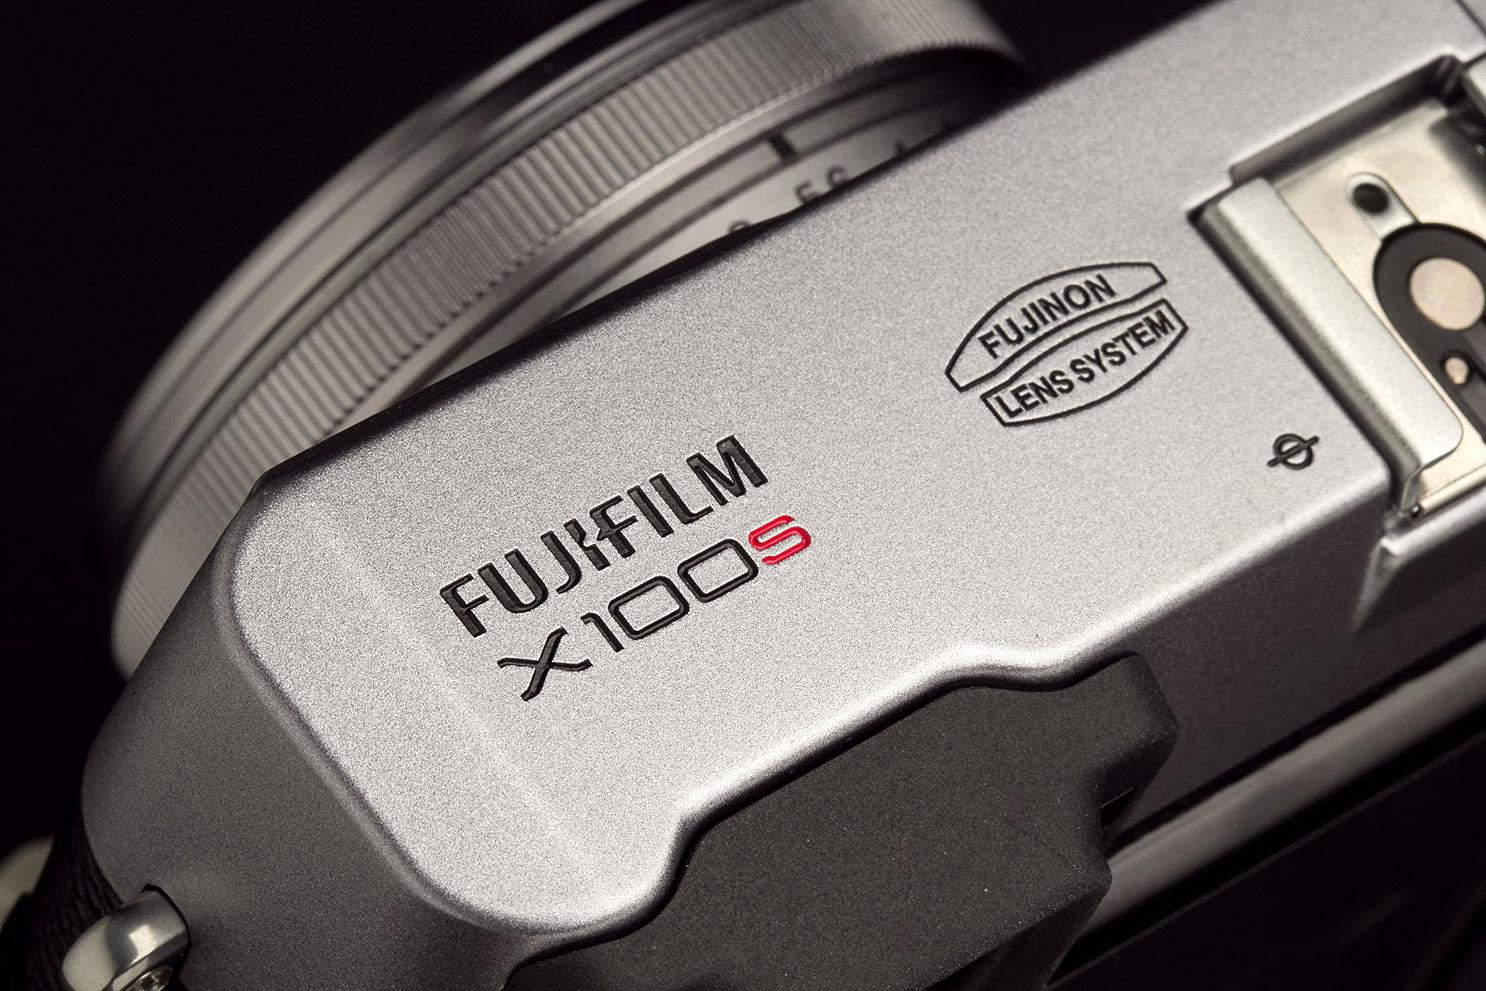 Fujifilm X100 Is The Best (Digital) Camera I Have Ever Used [Review]